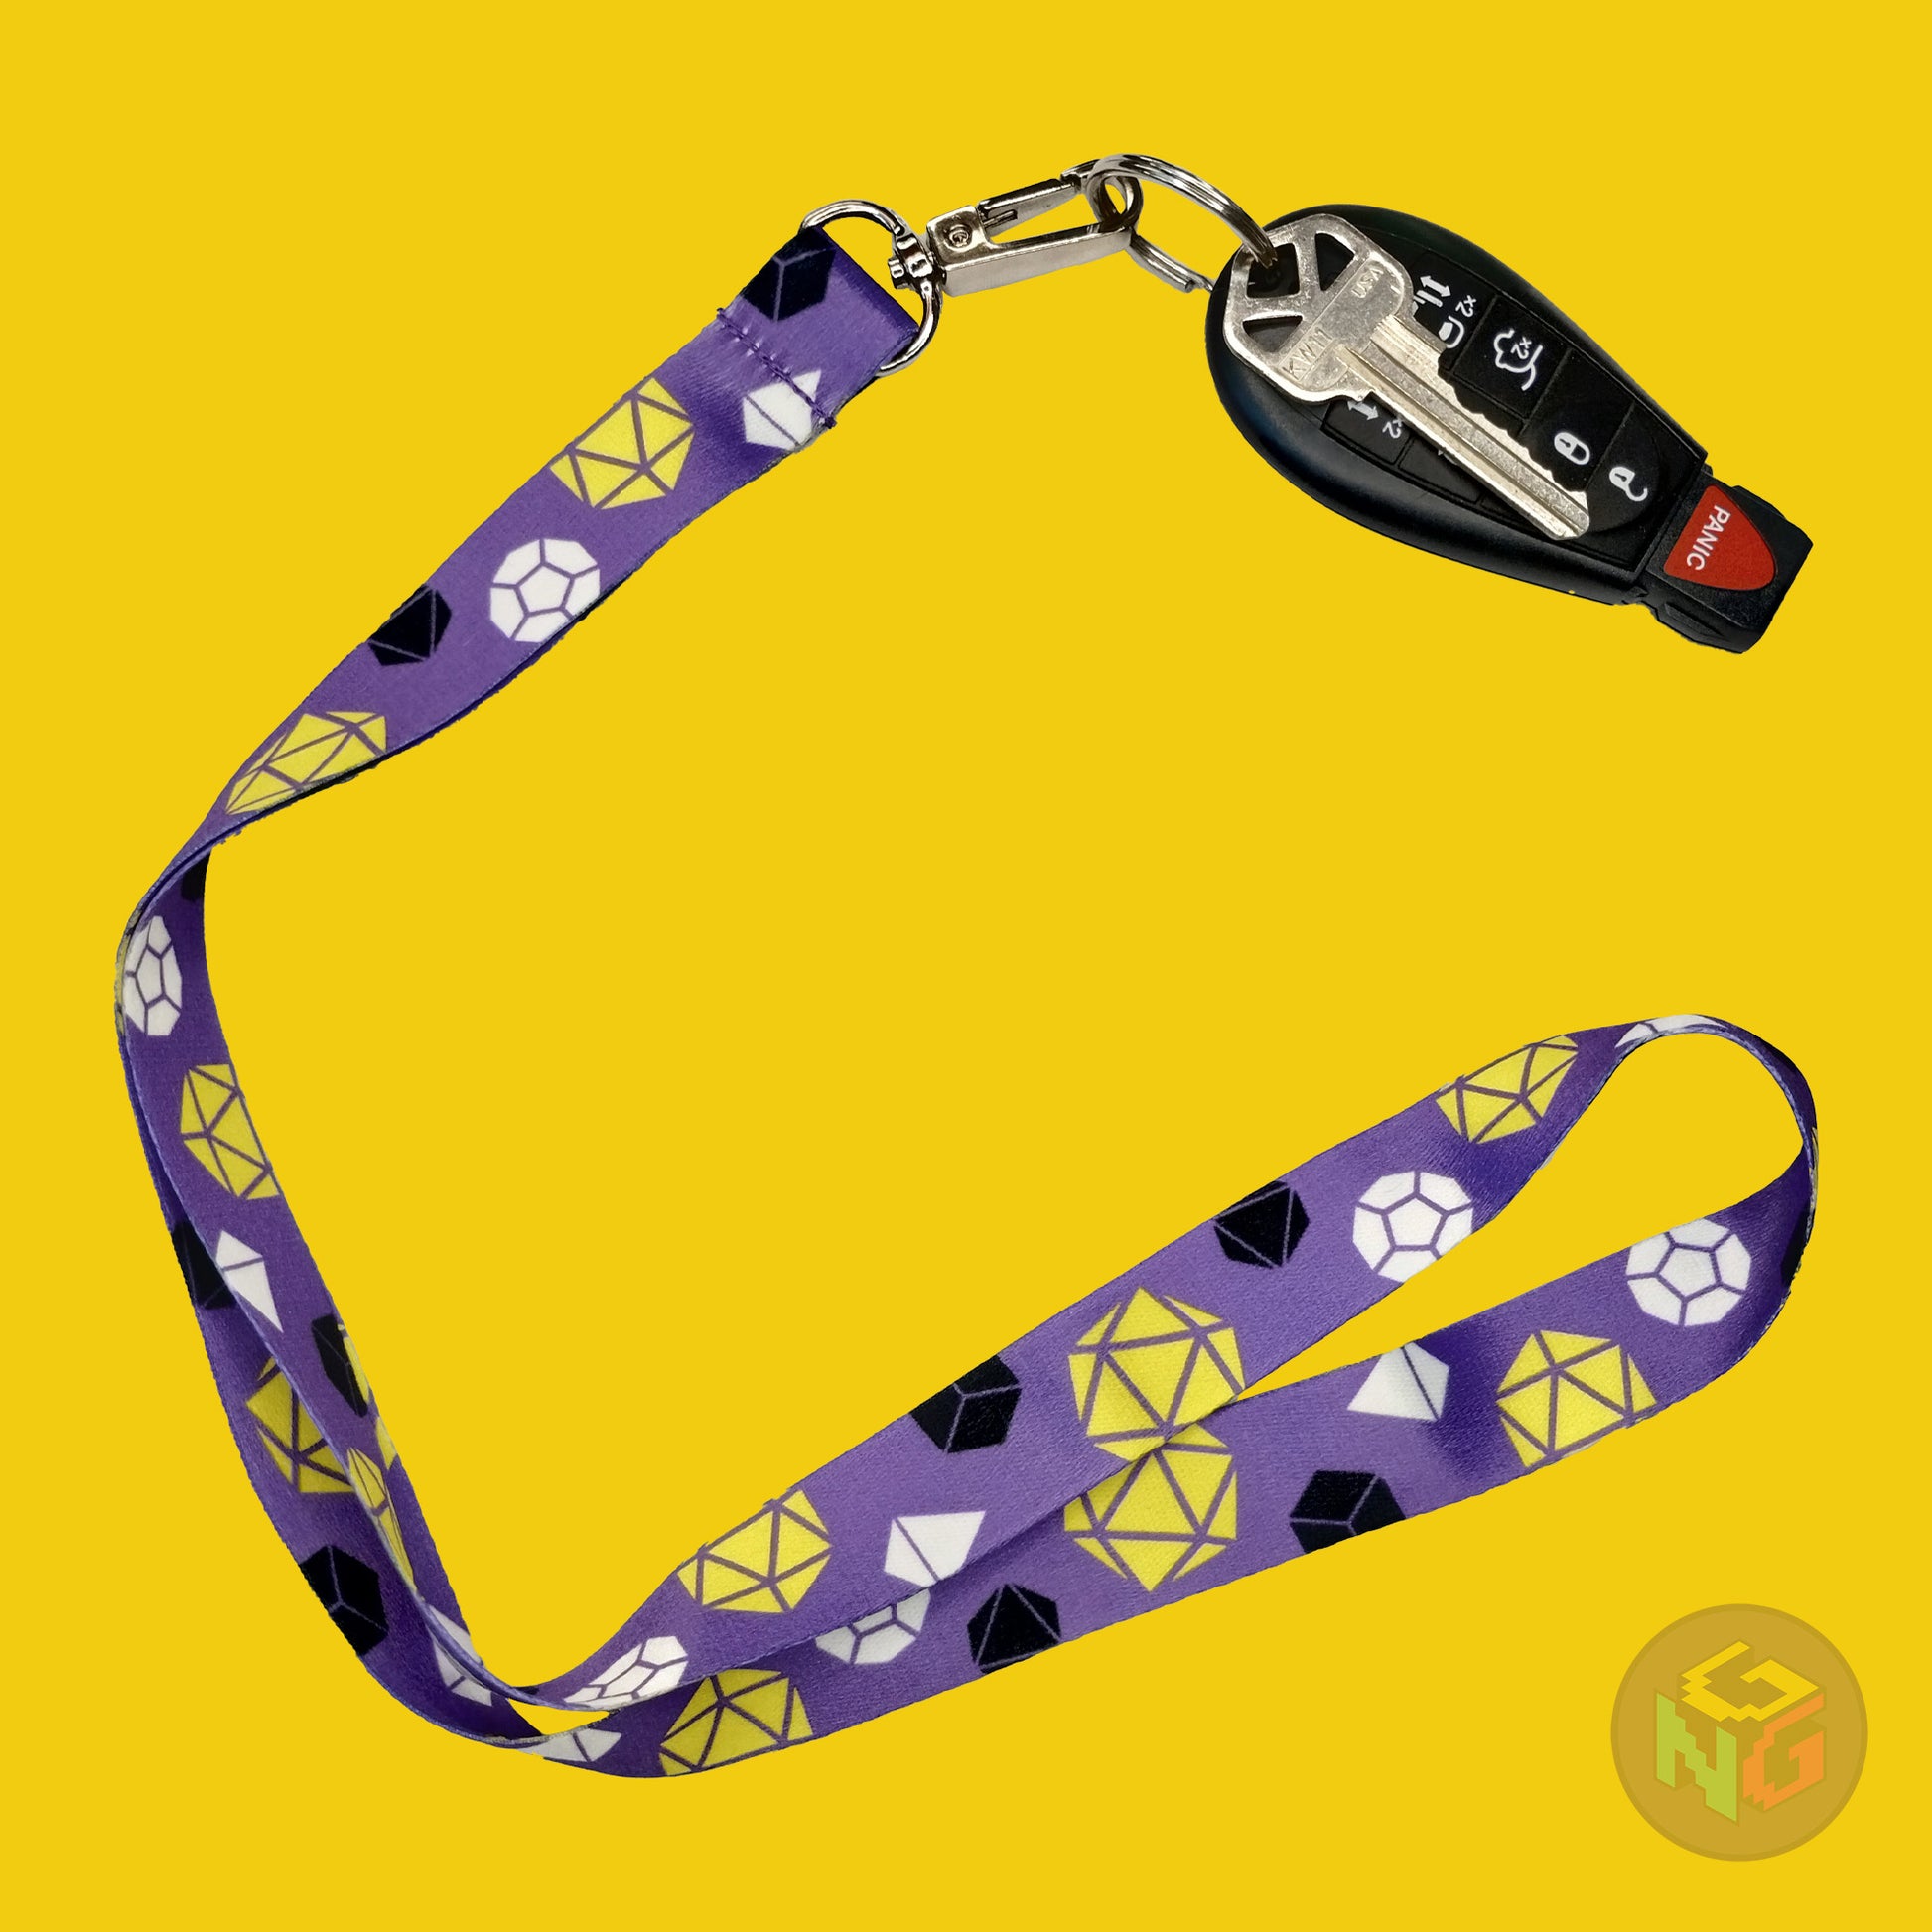 purple dnd nonbinary lanyard showing the black, white, and yellow tabletop dice with a key fob clipped to the end of the lanyard